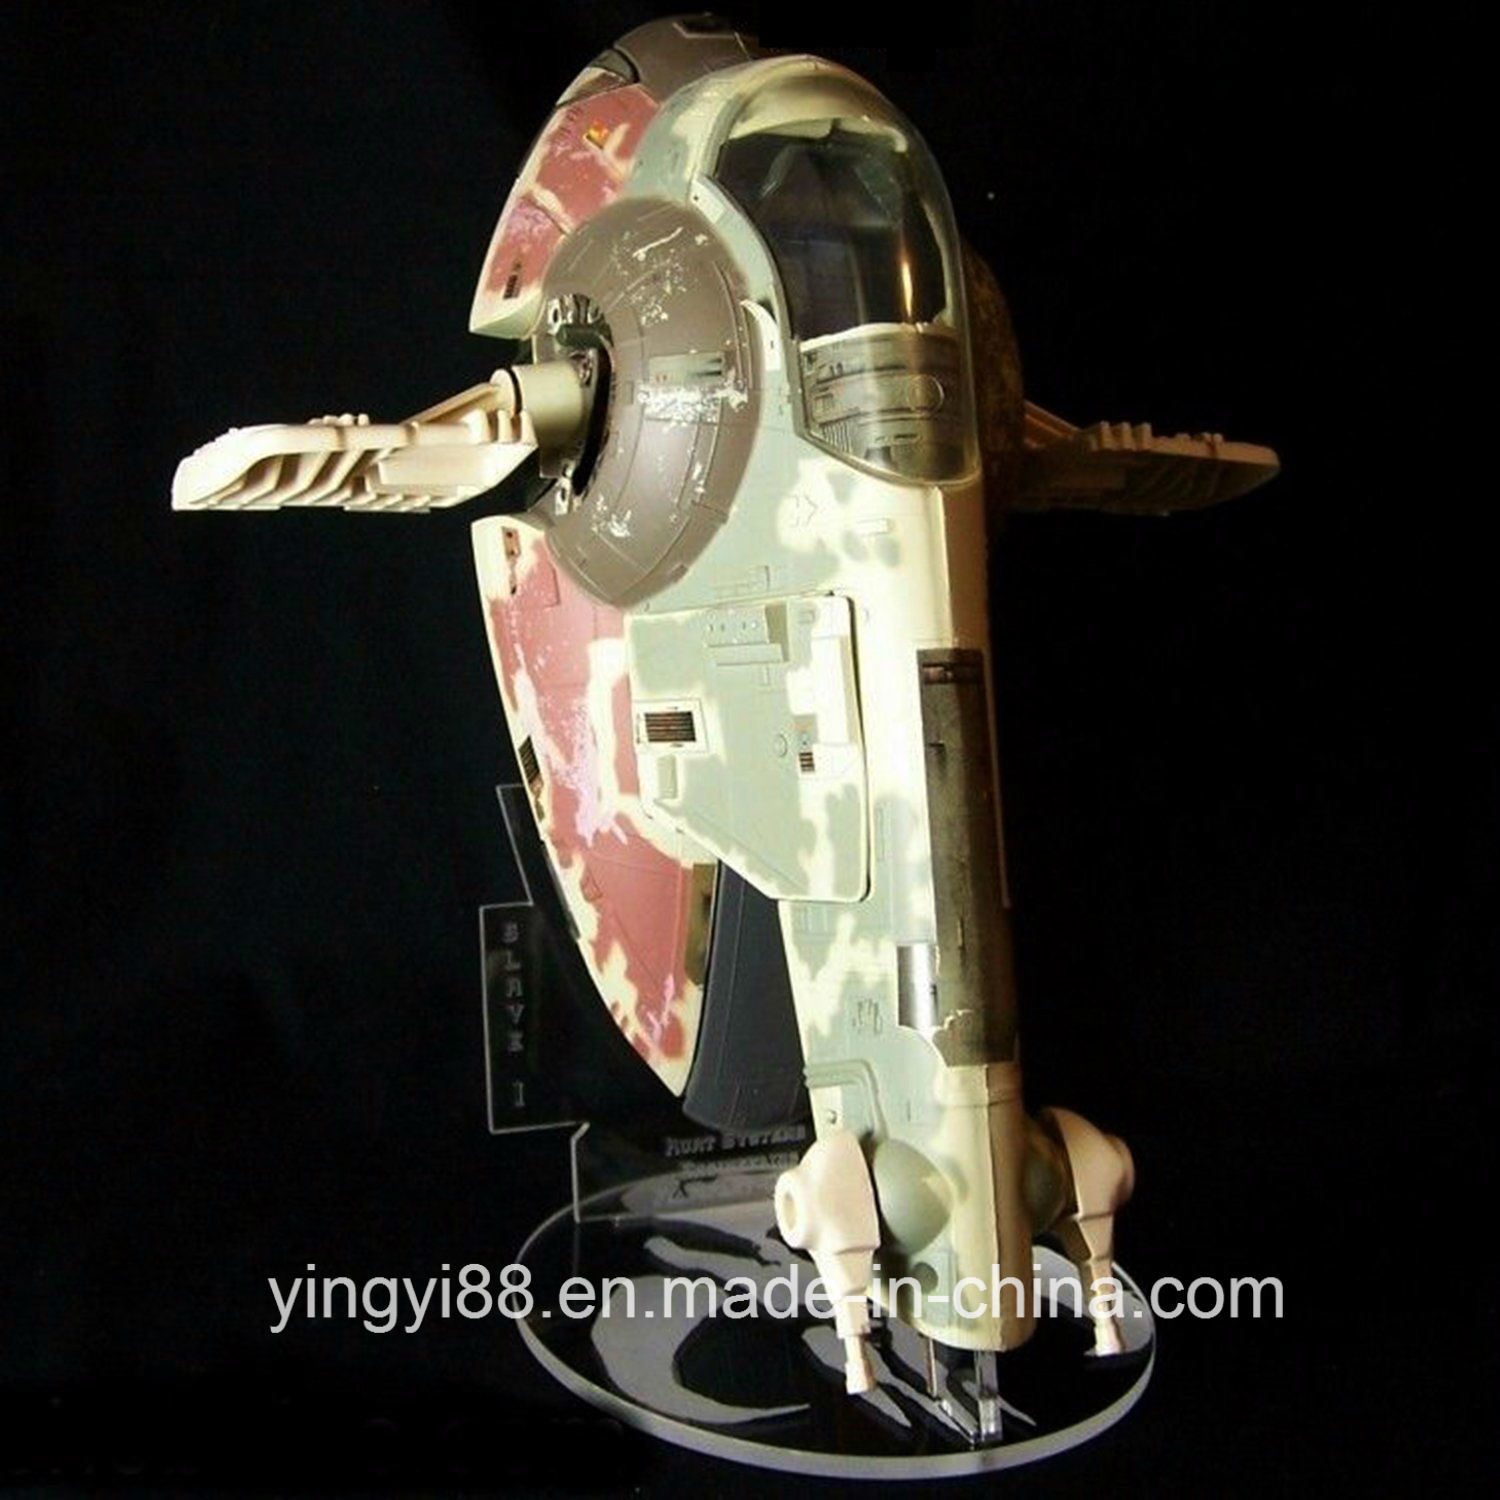 /proimages/2f0j00dwoQLpicLebq/wholesale-acrylic-display-stand-for-star-wars.jpg